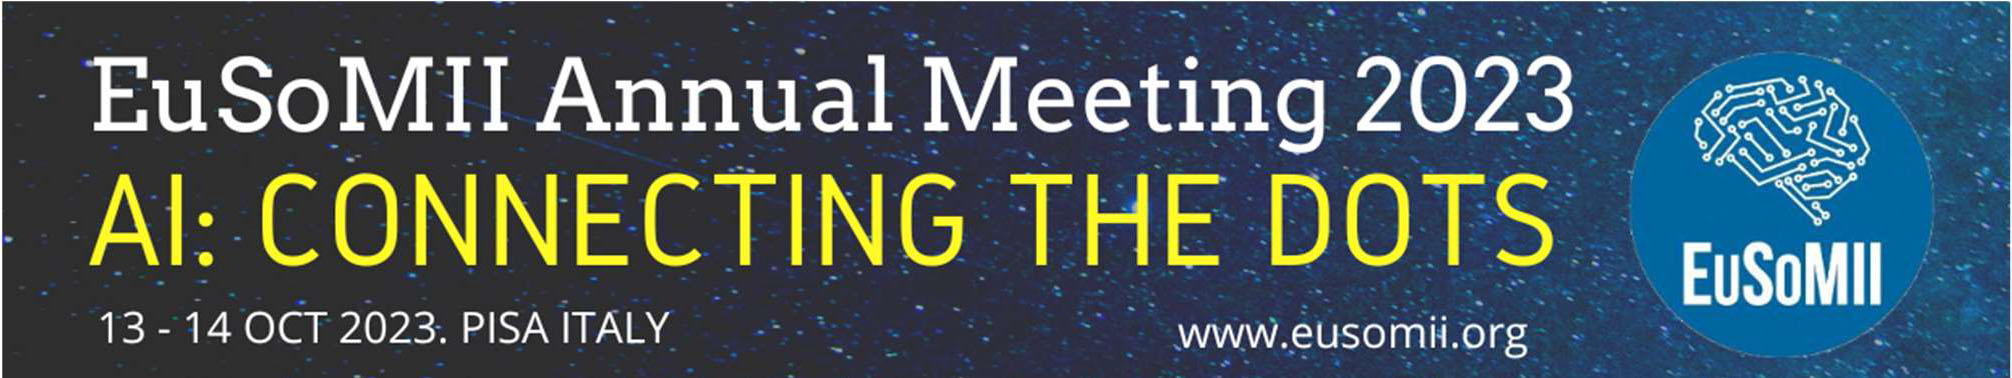 EUSOMI ANNUAL MEETING 2023 - AI:CONNECTING THE DOTS